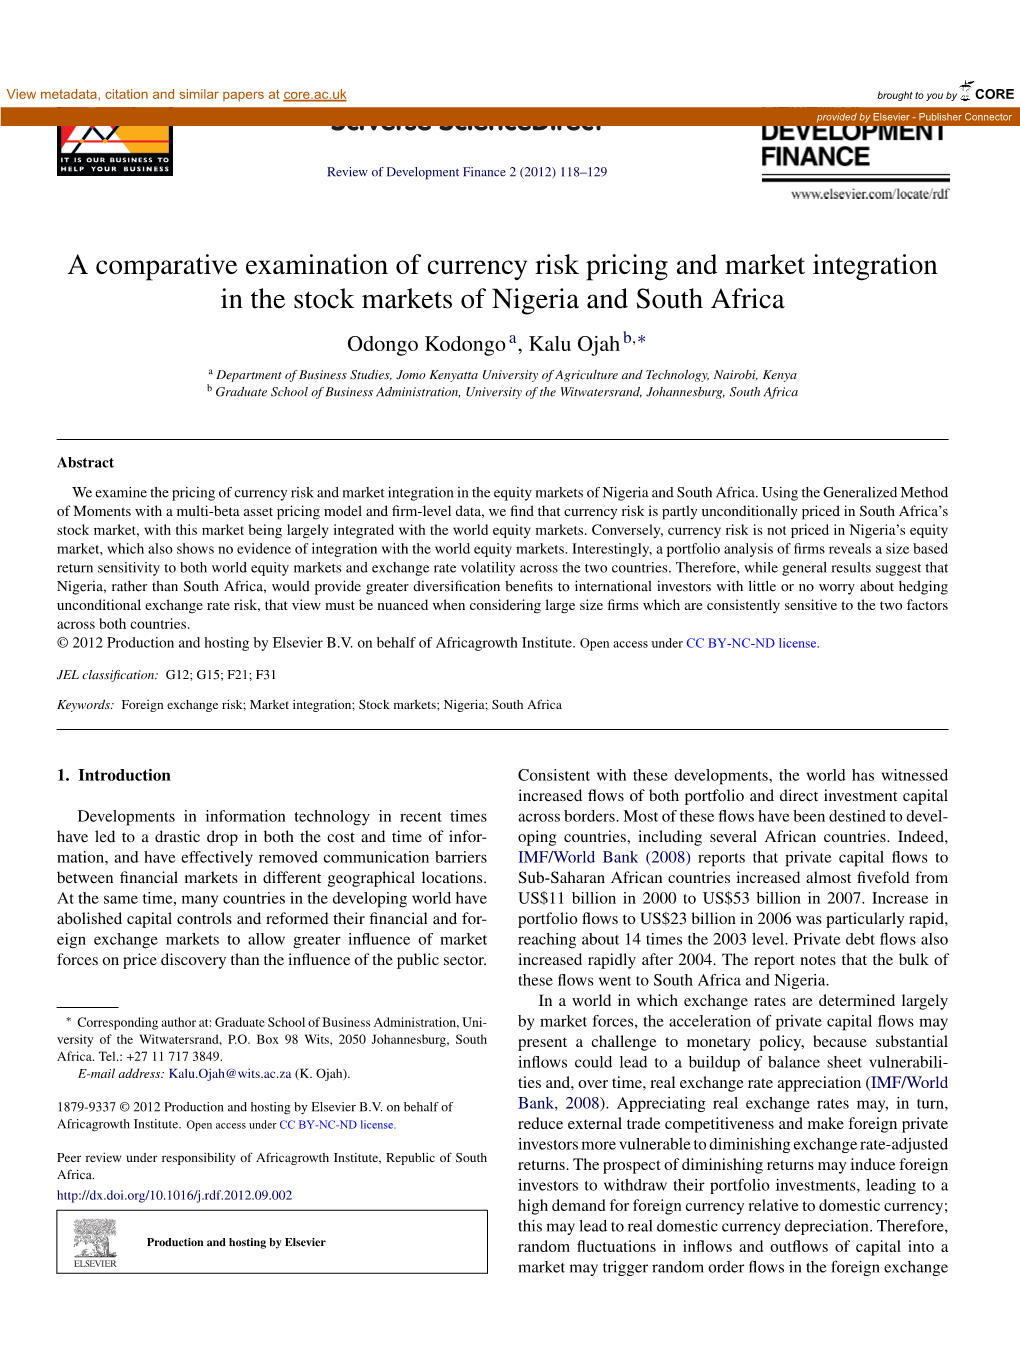 A Comparative Examination of Currency Risk Pricing and Market